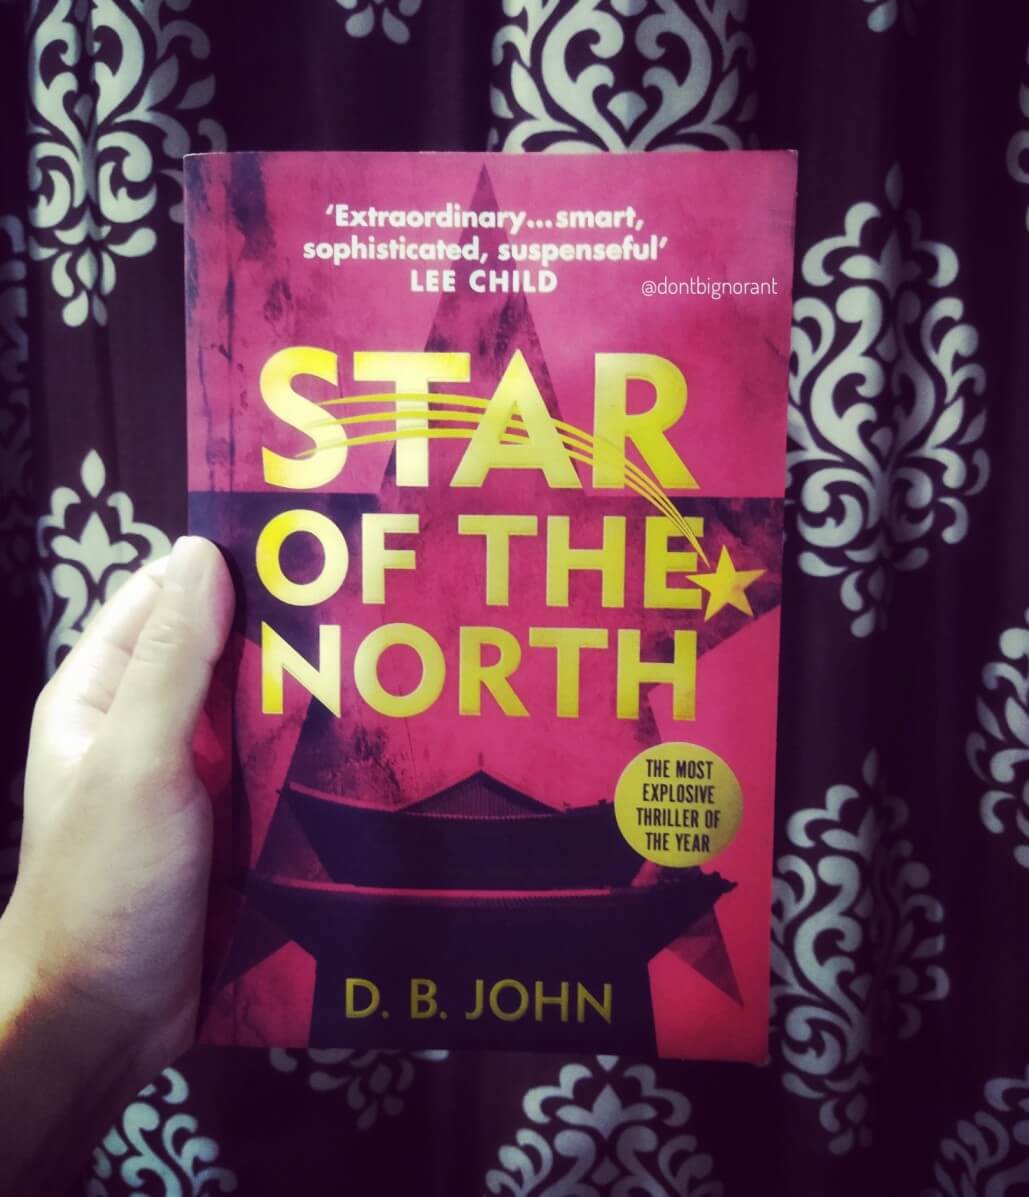 star-of-the-north-a-north-korean-thriller-i-read-i-write